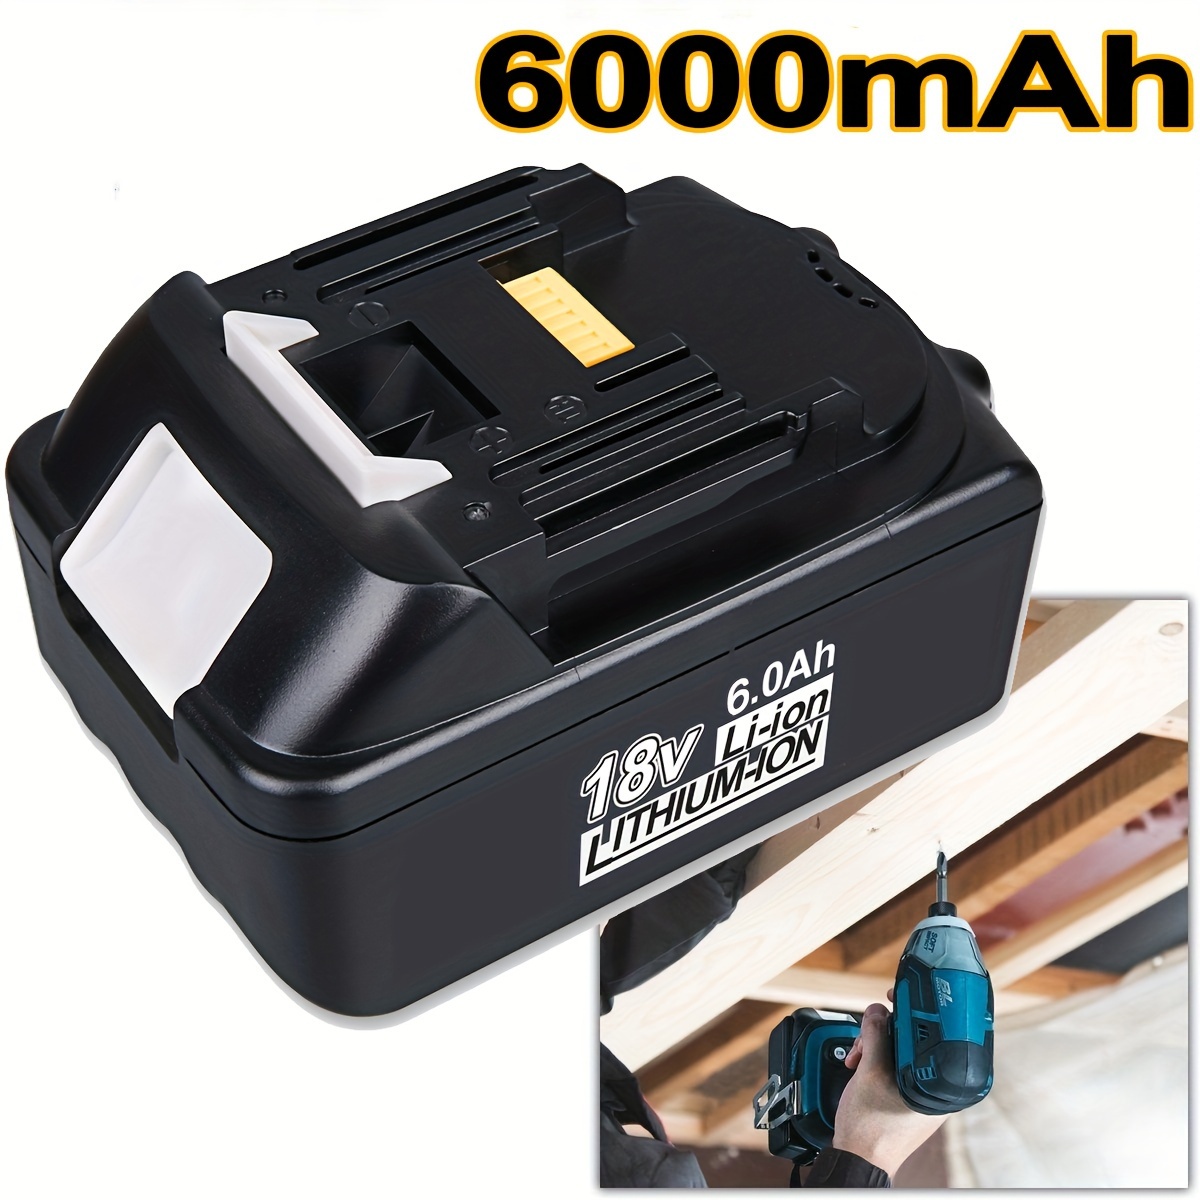 

1pack/2pack Upgrade 18v 6000mah Bl1860 Battery Replace For Makita Bl1860b Bl1860b-2 Bl1850 Bl1850b Bl1840 Bl1840b Bl1830 Bl1830b Bl1820 Bl1815 Bl1815b -400 194204-5 Drill Tools